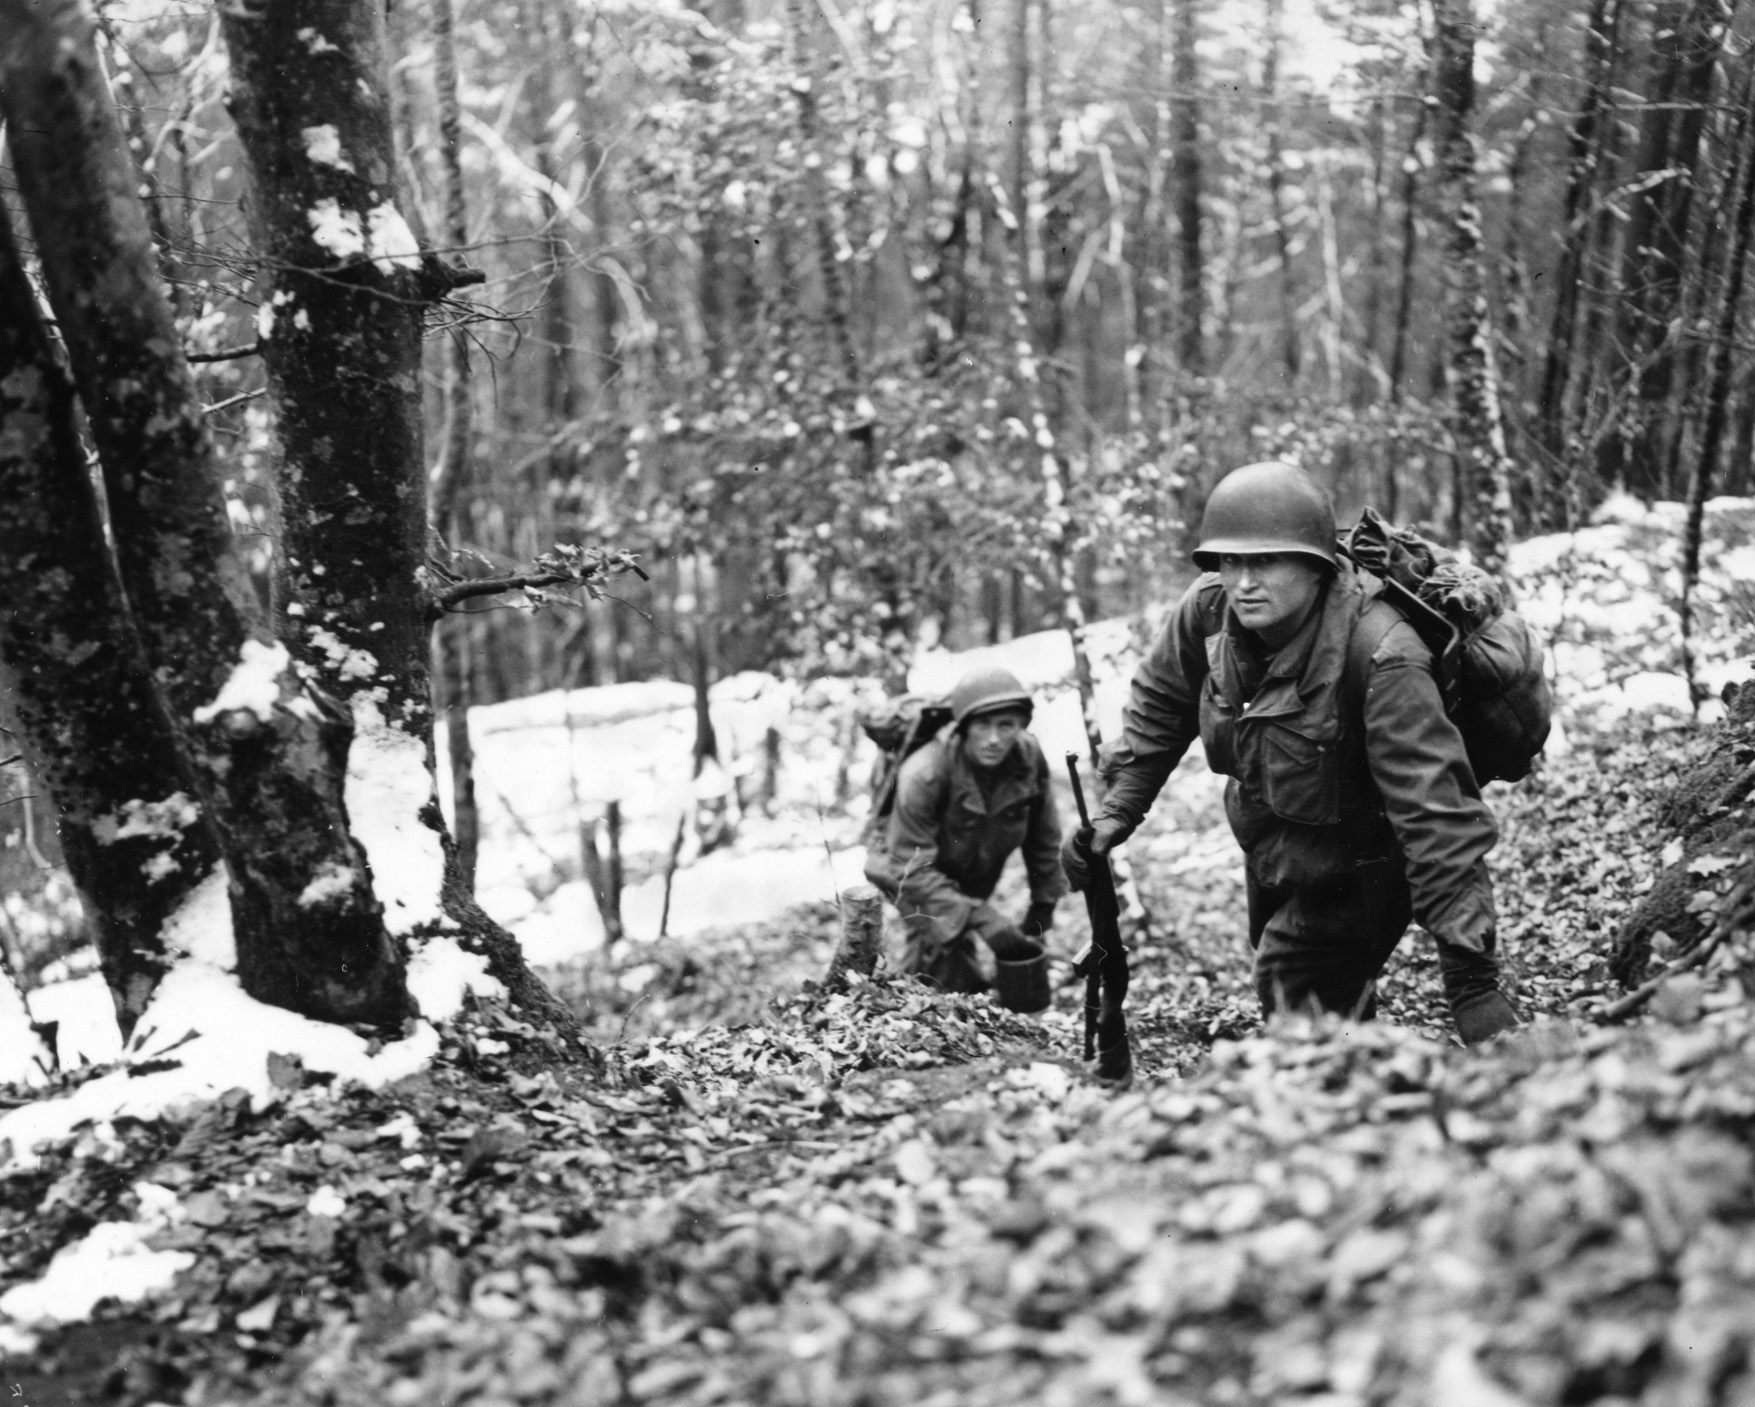 Working their way up a steep, snowy hill in the Vosges Mountains region of Alsace-Lorraine, men of the 45th Infantry Division prepare to attack the enemy. The 100th Division relieved the 45th in this area. Fighting in heavily wooded areas like this proved problematic.